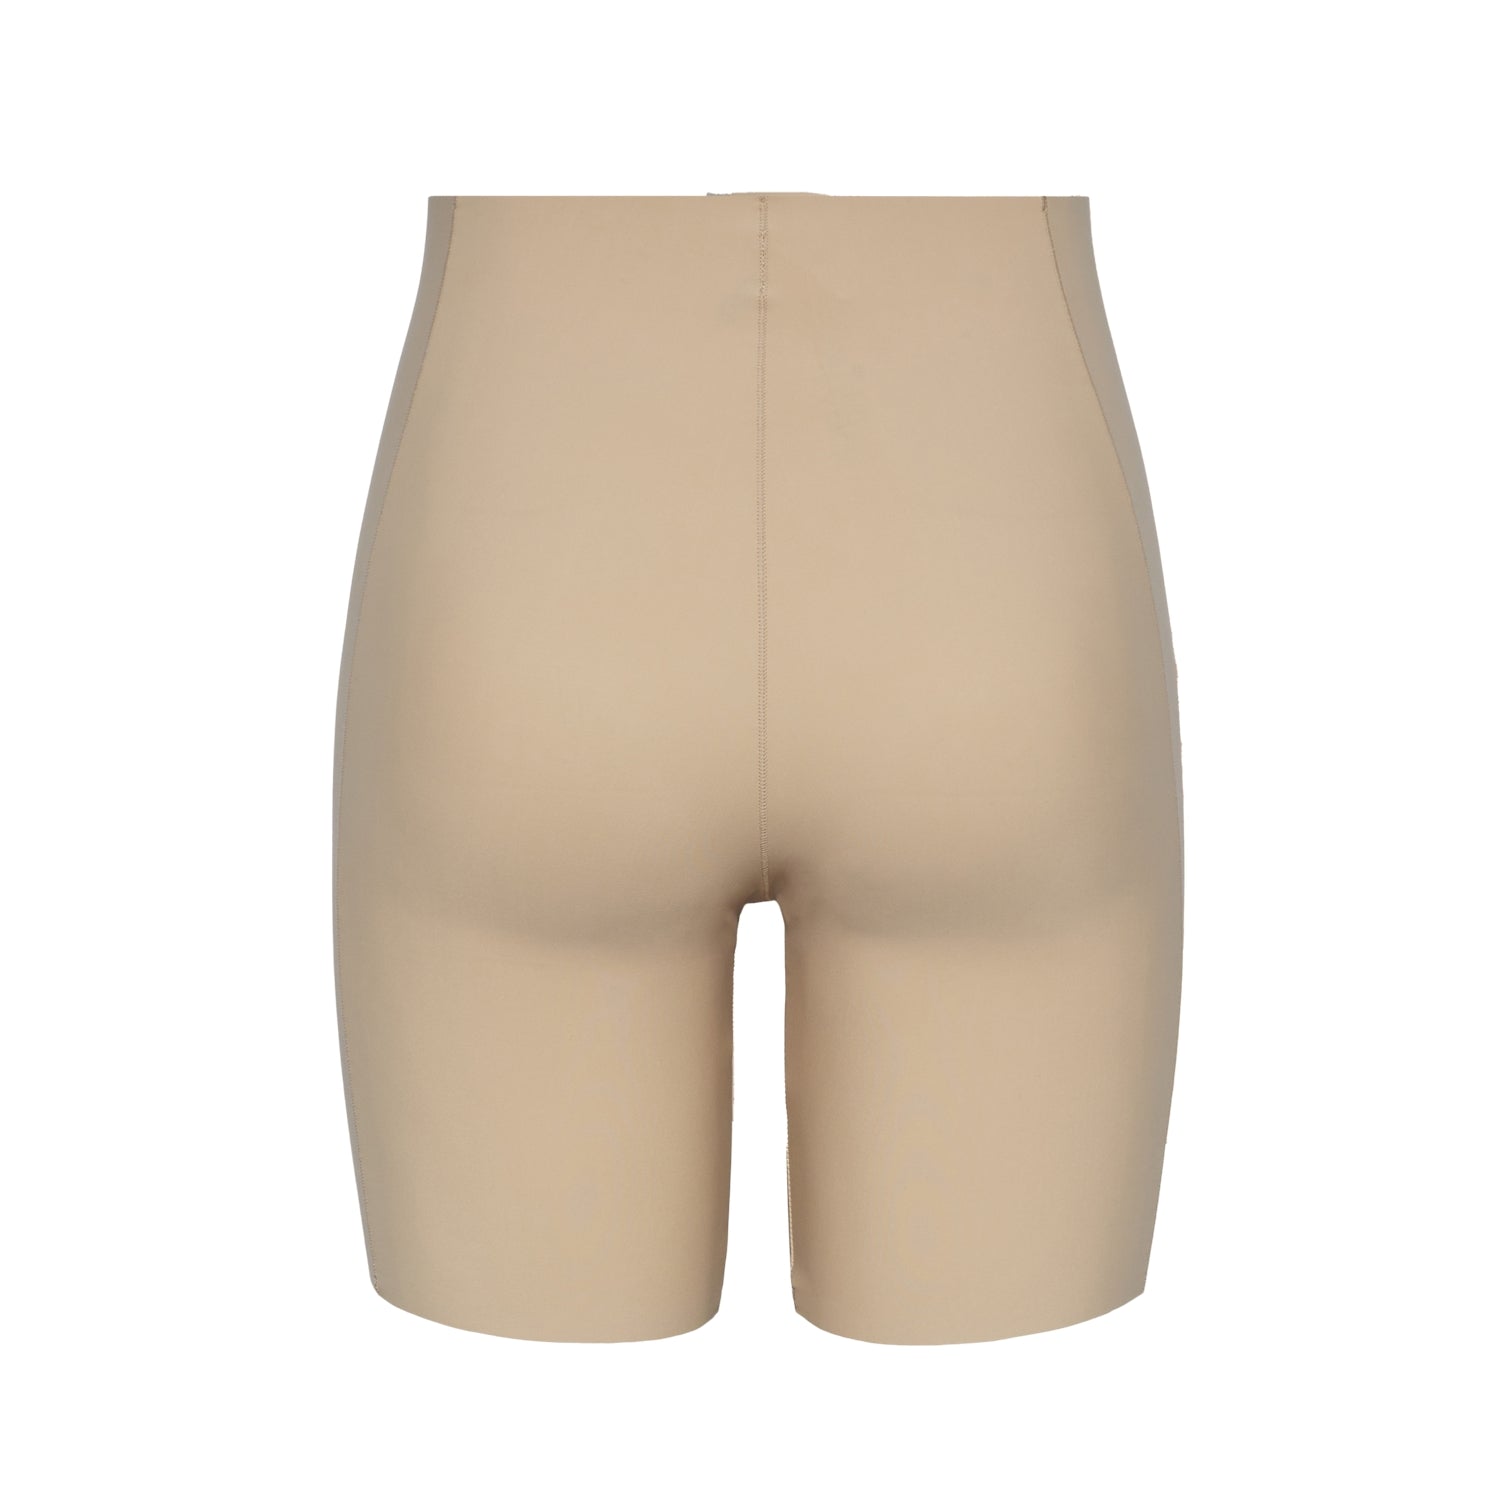 Pieces Namee Light Shapewear shorts, Nude